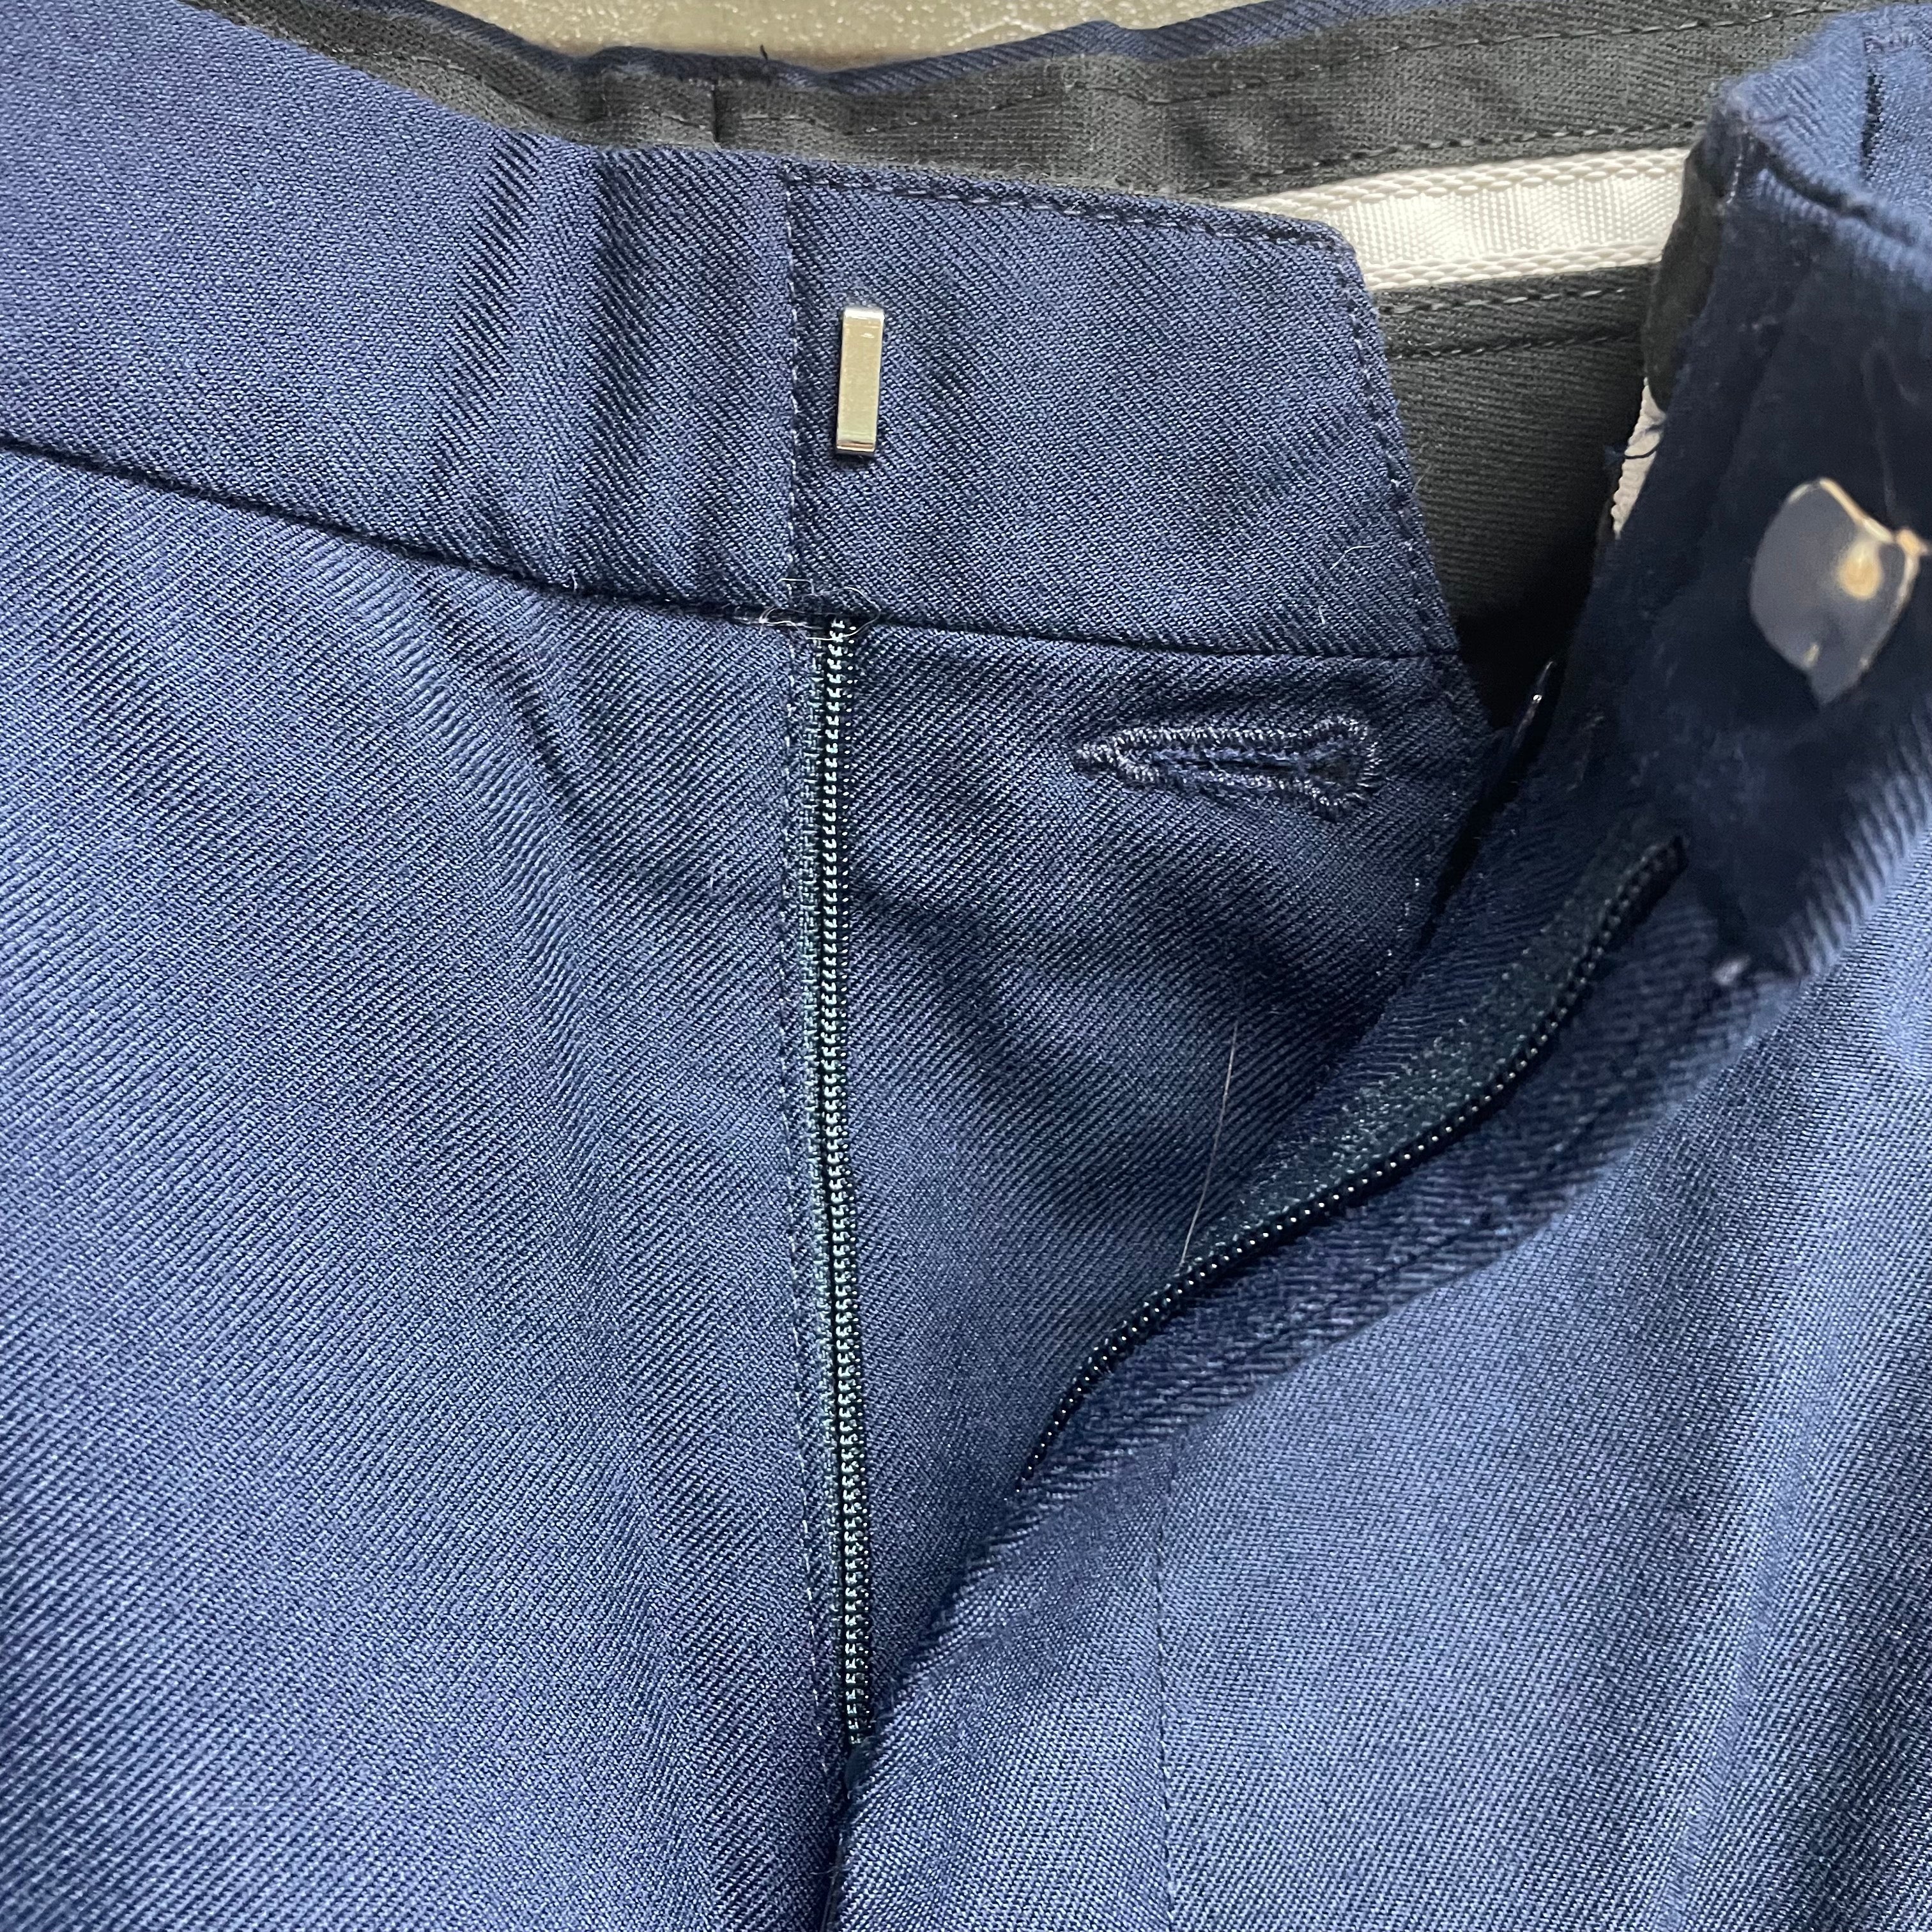 [ ONLY ONE ! ] TROUSERS, MAN'S SERVICE Air Force Blue 1620 / U.S.MILITARY